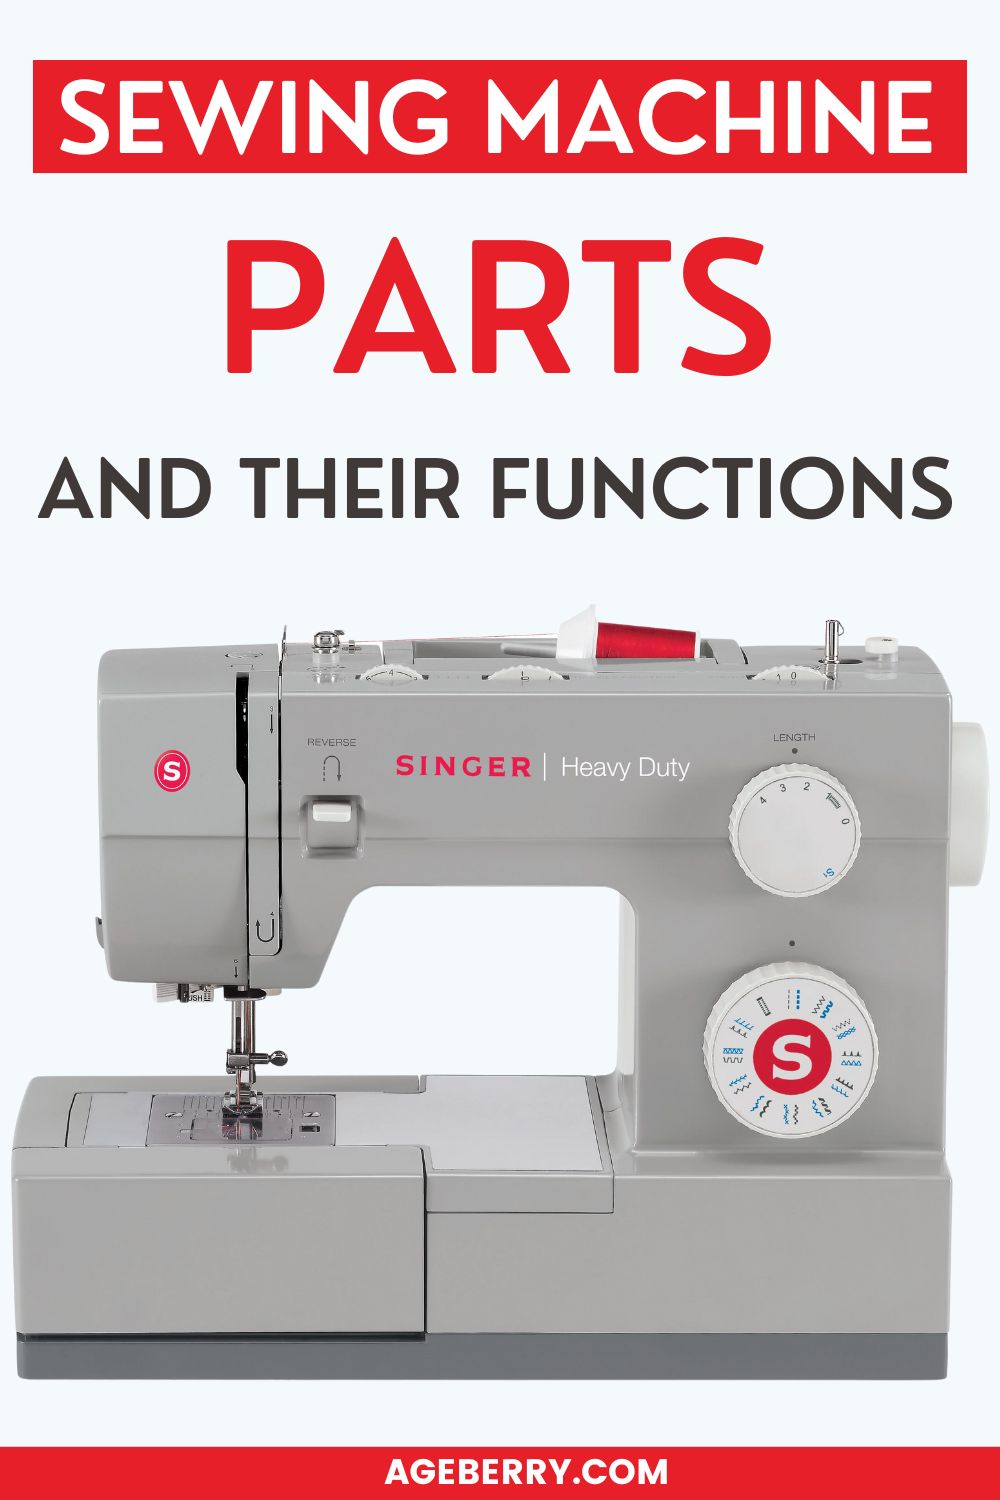 Do you know basic sewing machine parts and their functions? Sewing tutorial